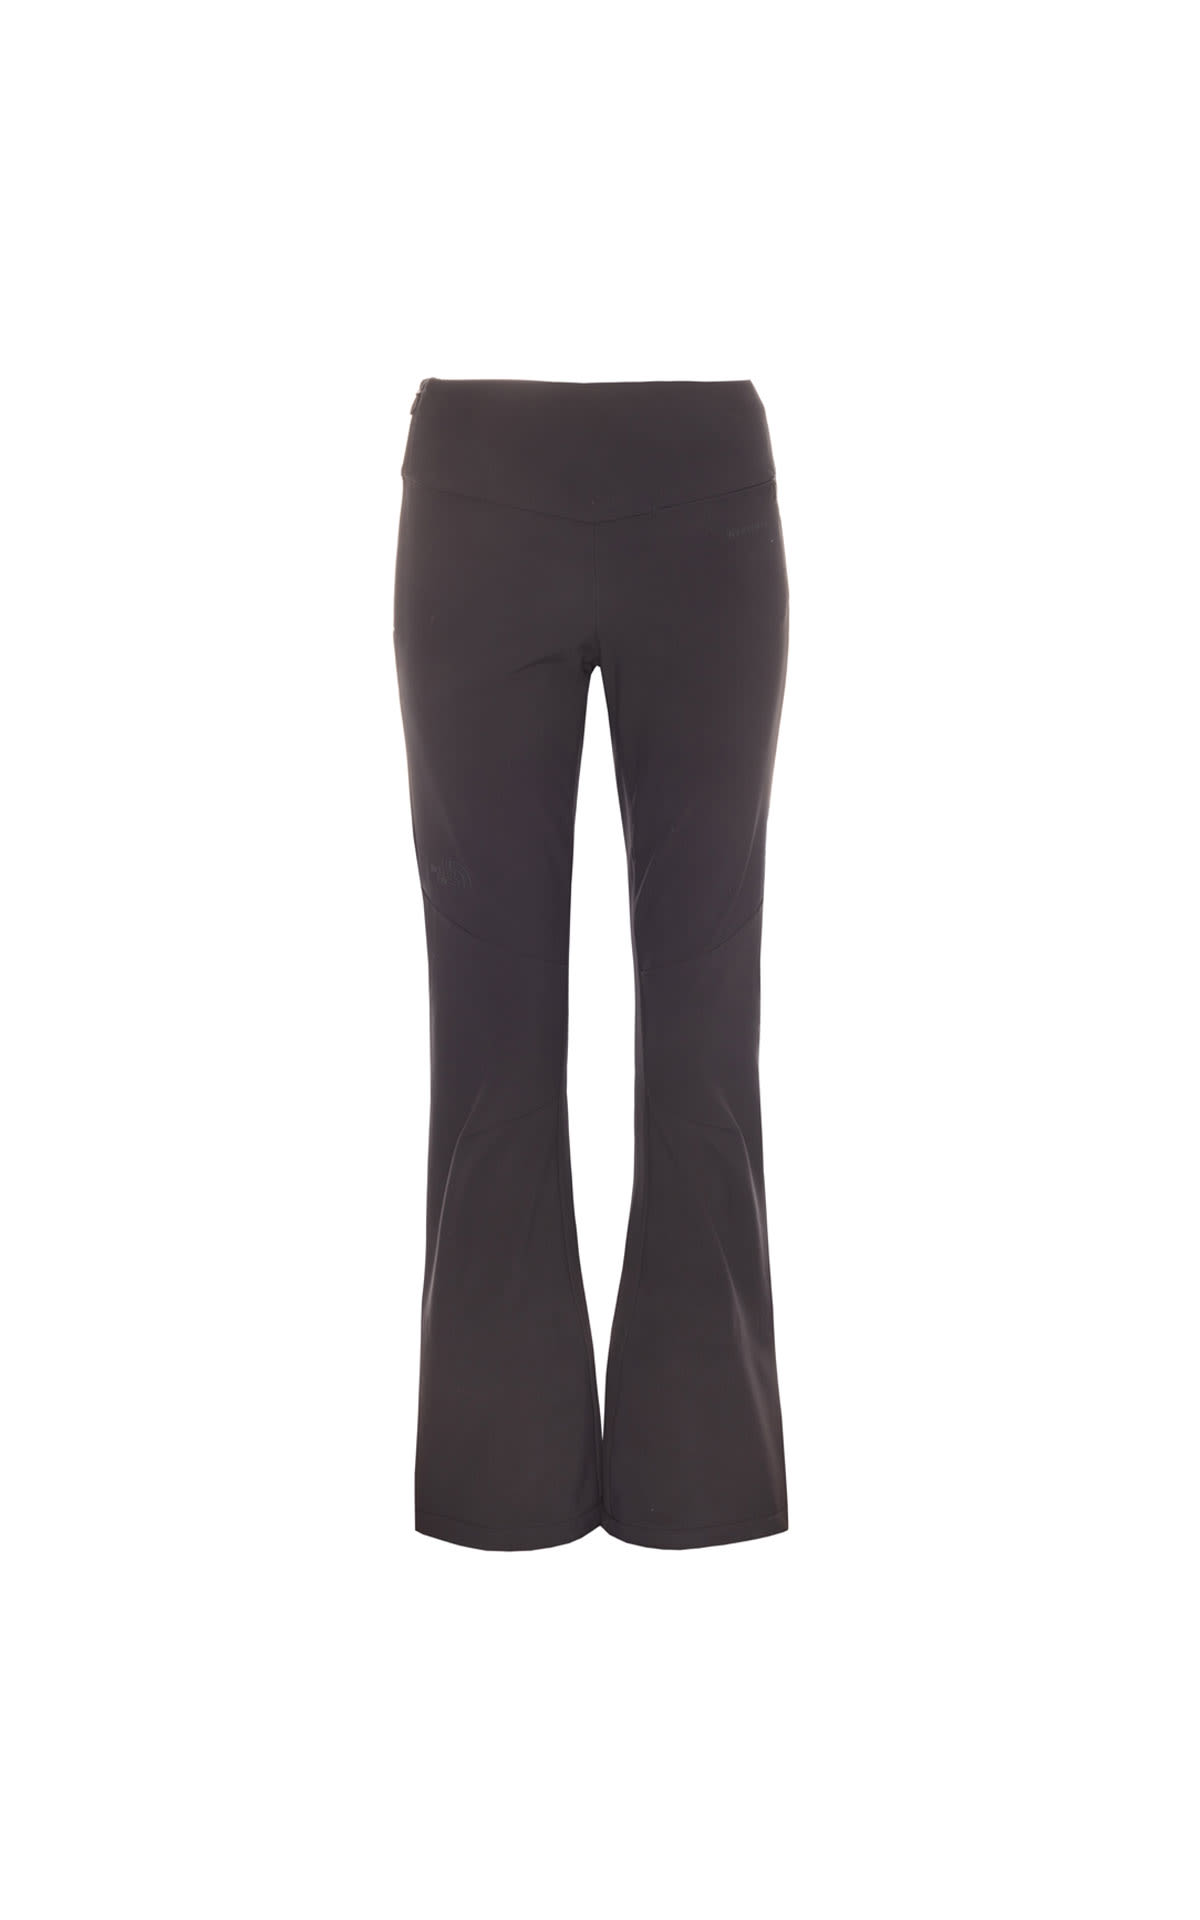 The North Face Snoga trouser from Bicester Village